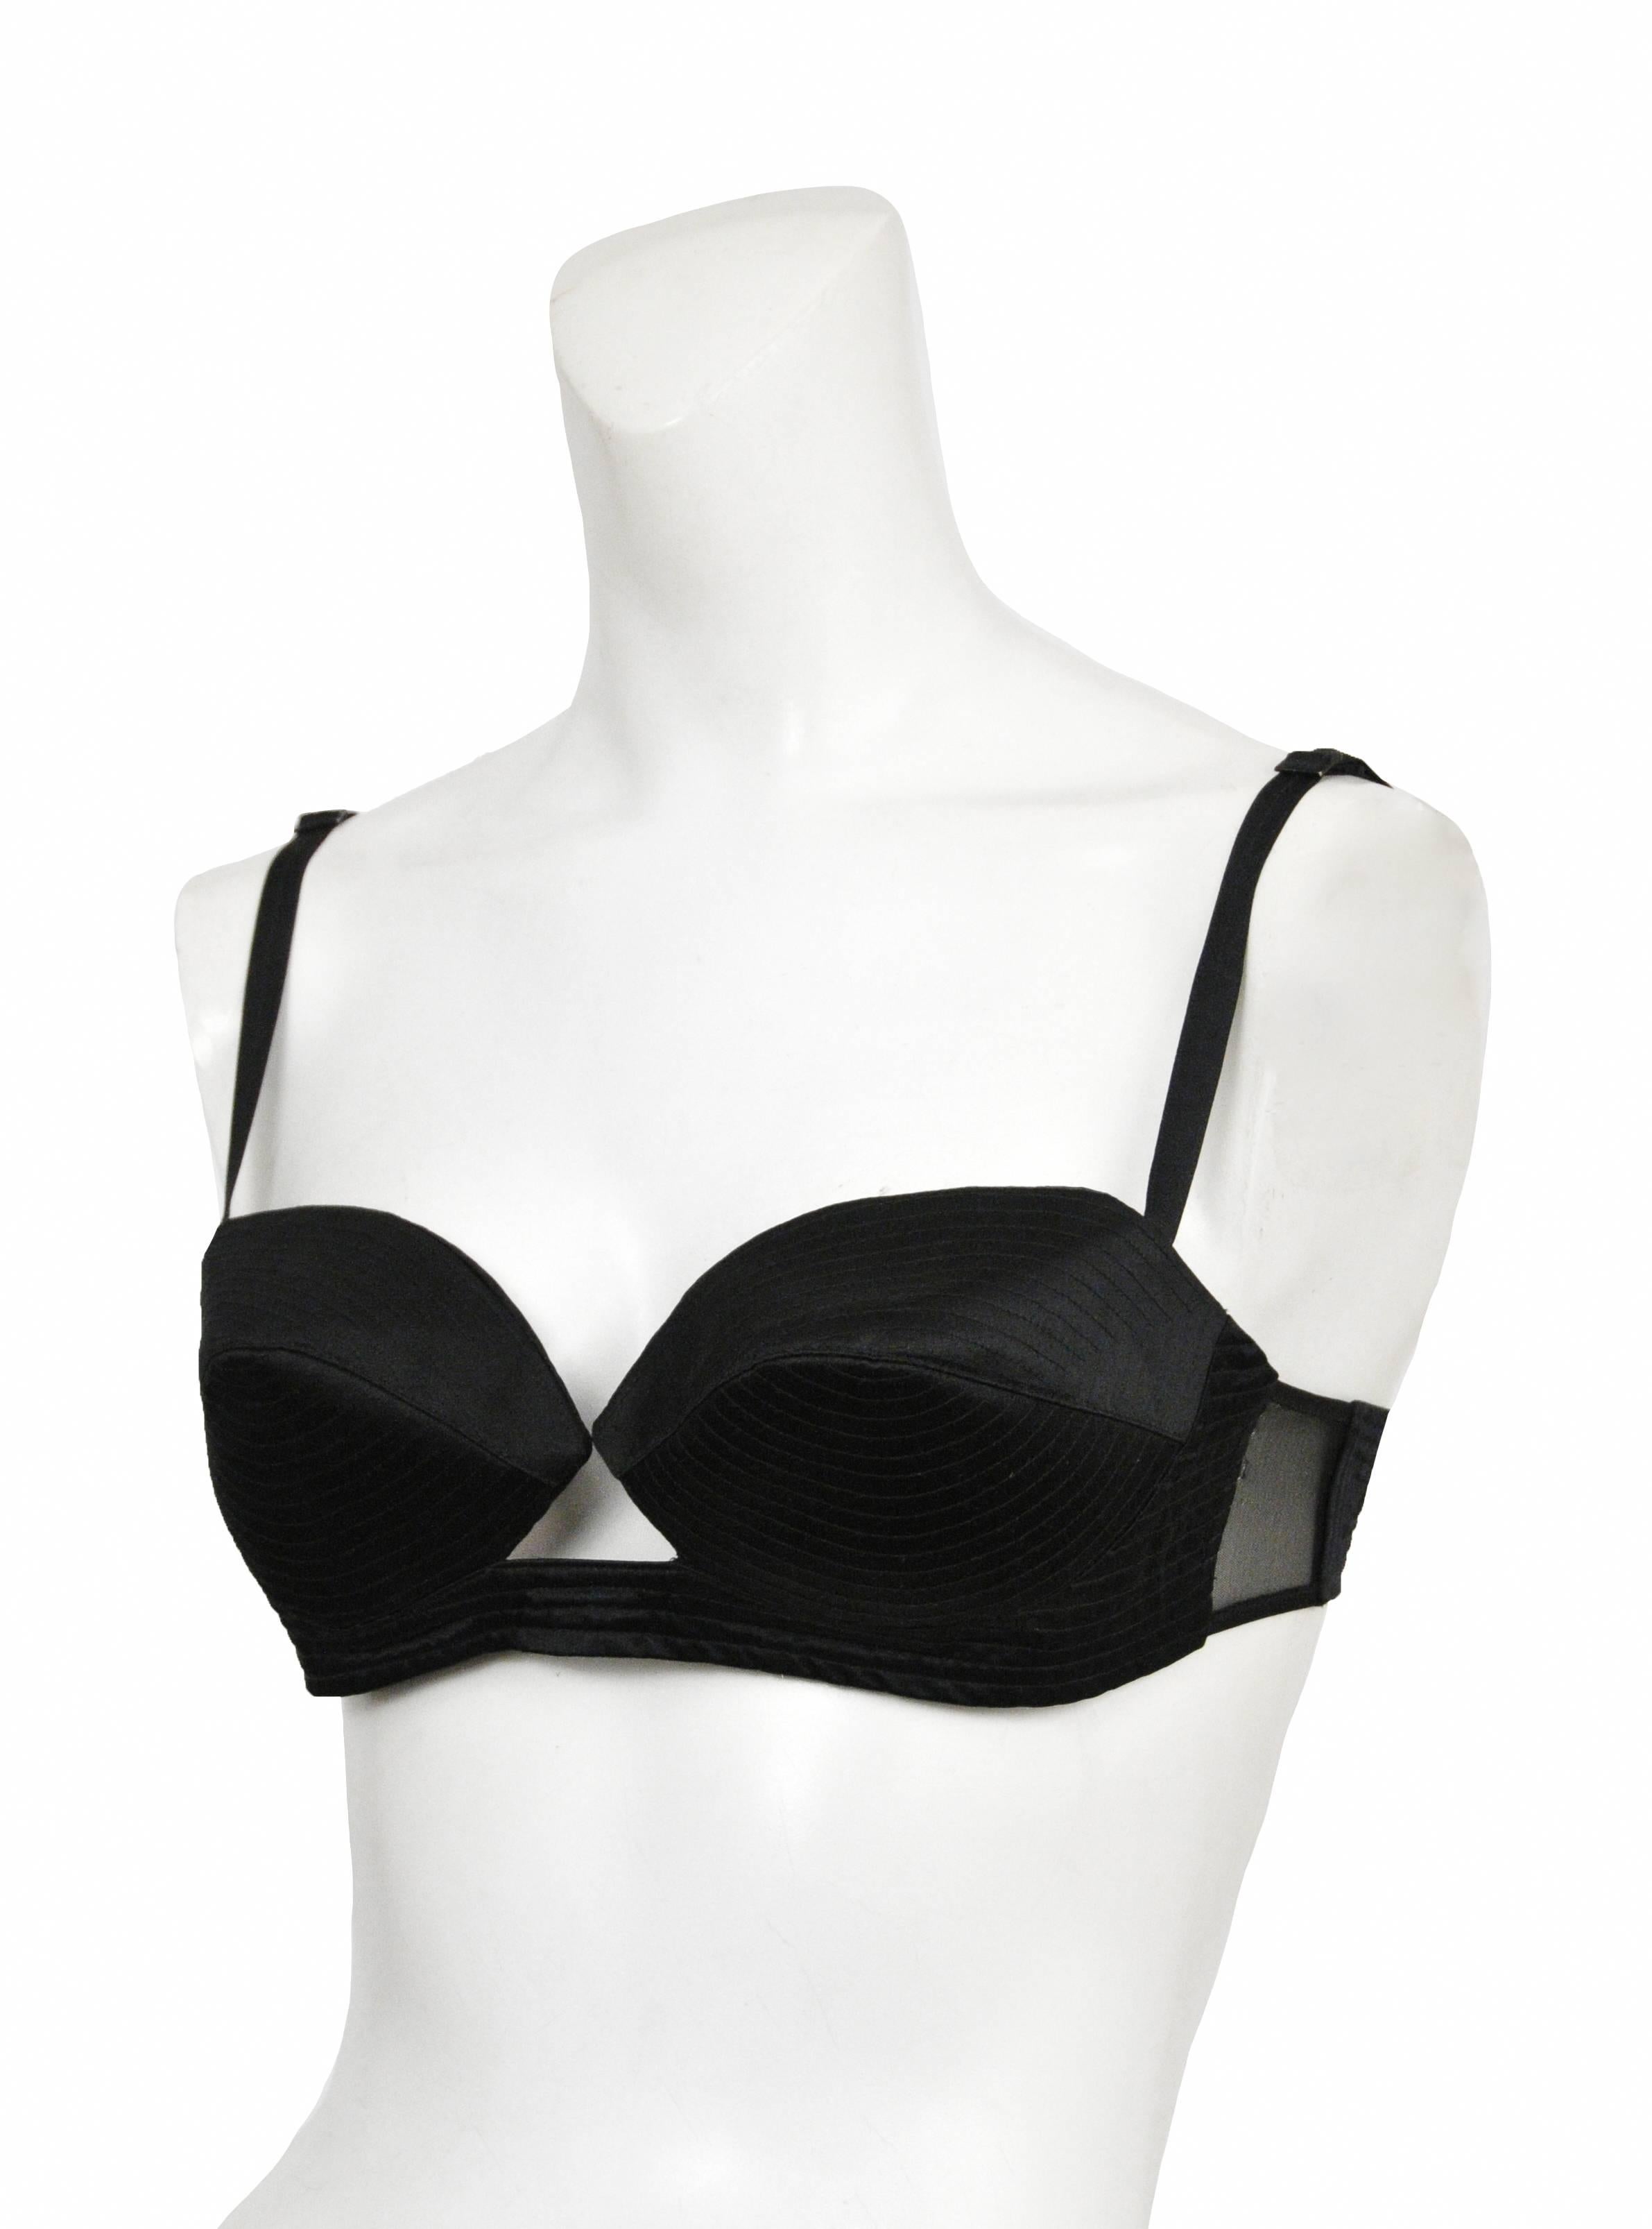 Vintage Tom Ford for Gucci black silk satin bra featuring quilting details and mesh side panels. Runway piece from the Spring Summer 2001 Collection.
Please inquire for additional images.